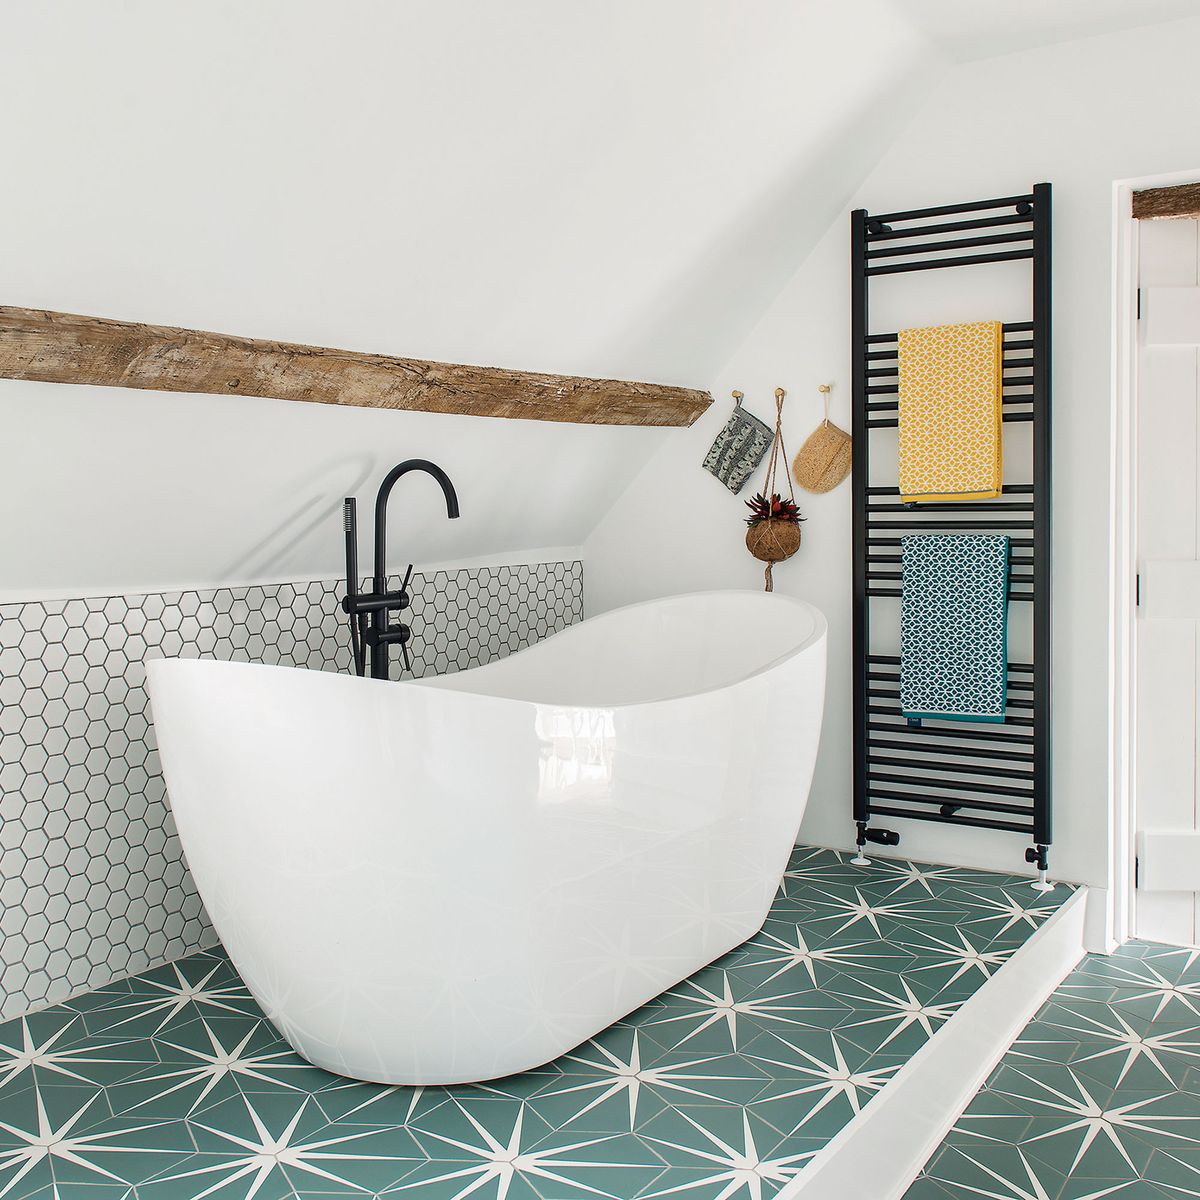 Bathroom Renovations That Will Add the Most Value